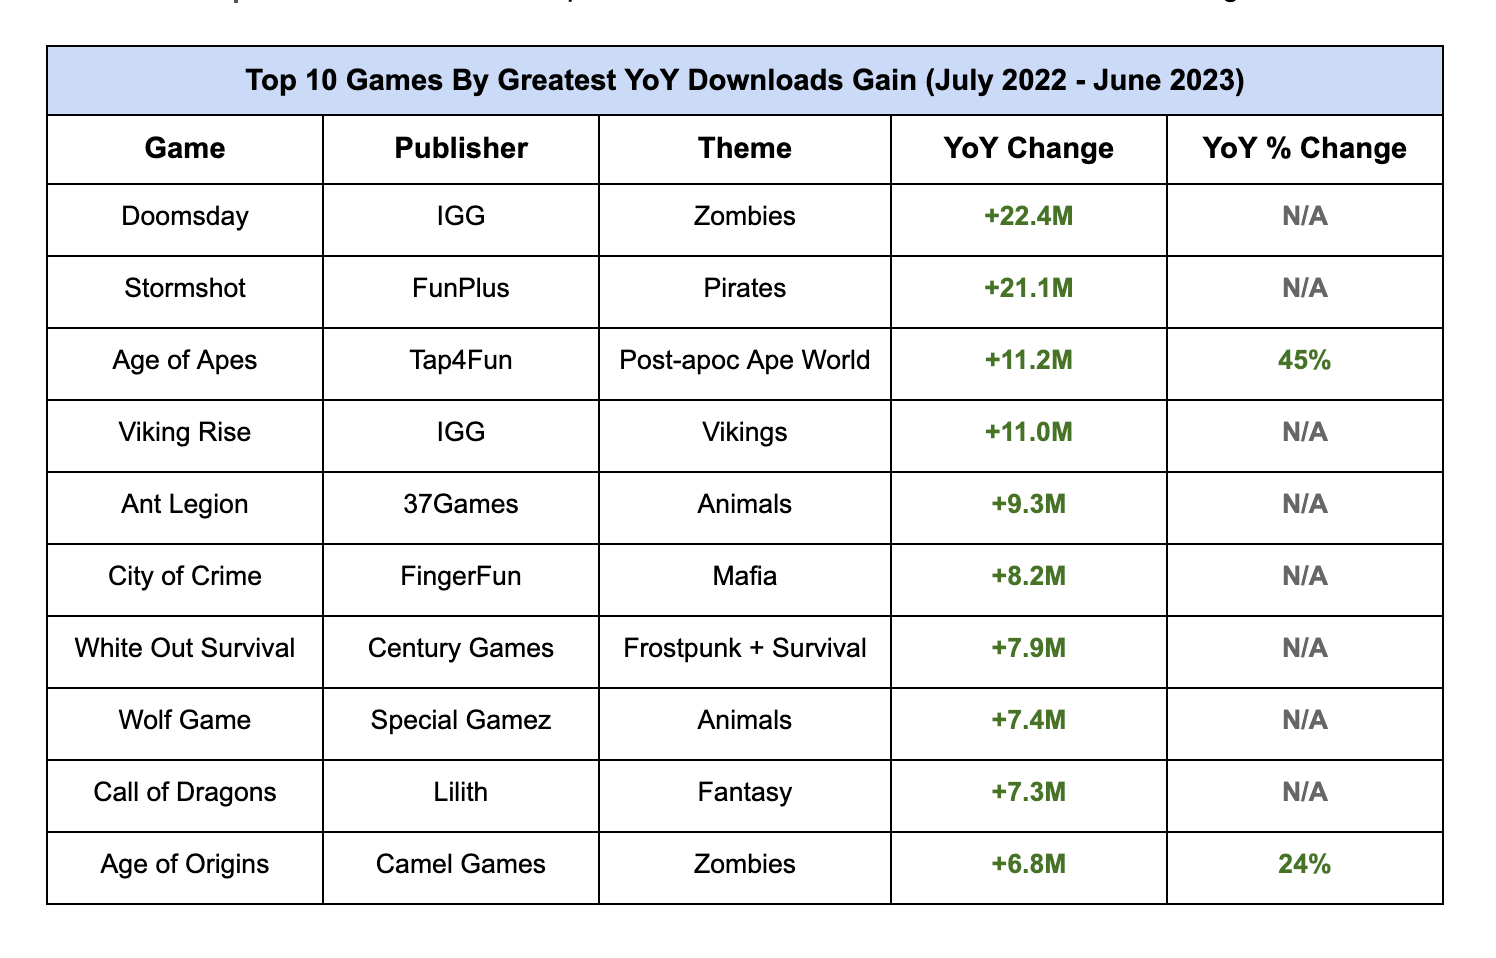 Top 10 Games by Greatest Yoy Downloads July 2022 June 2023